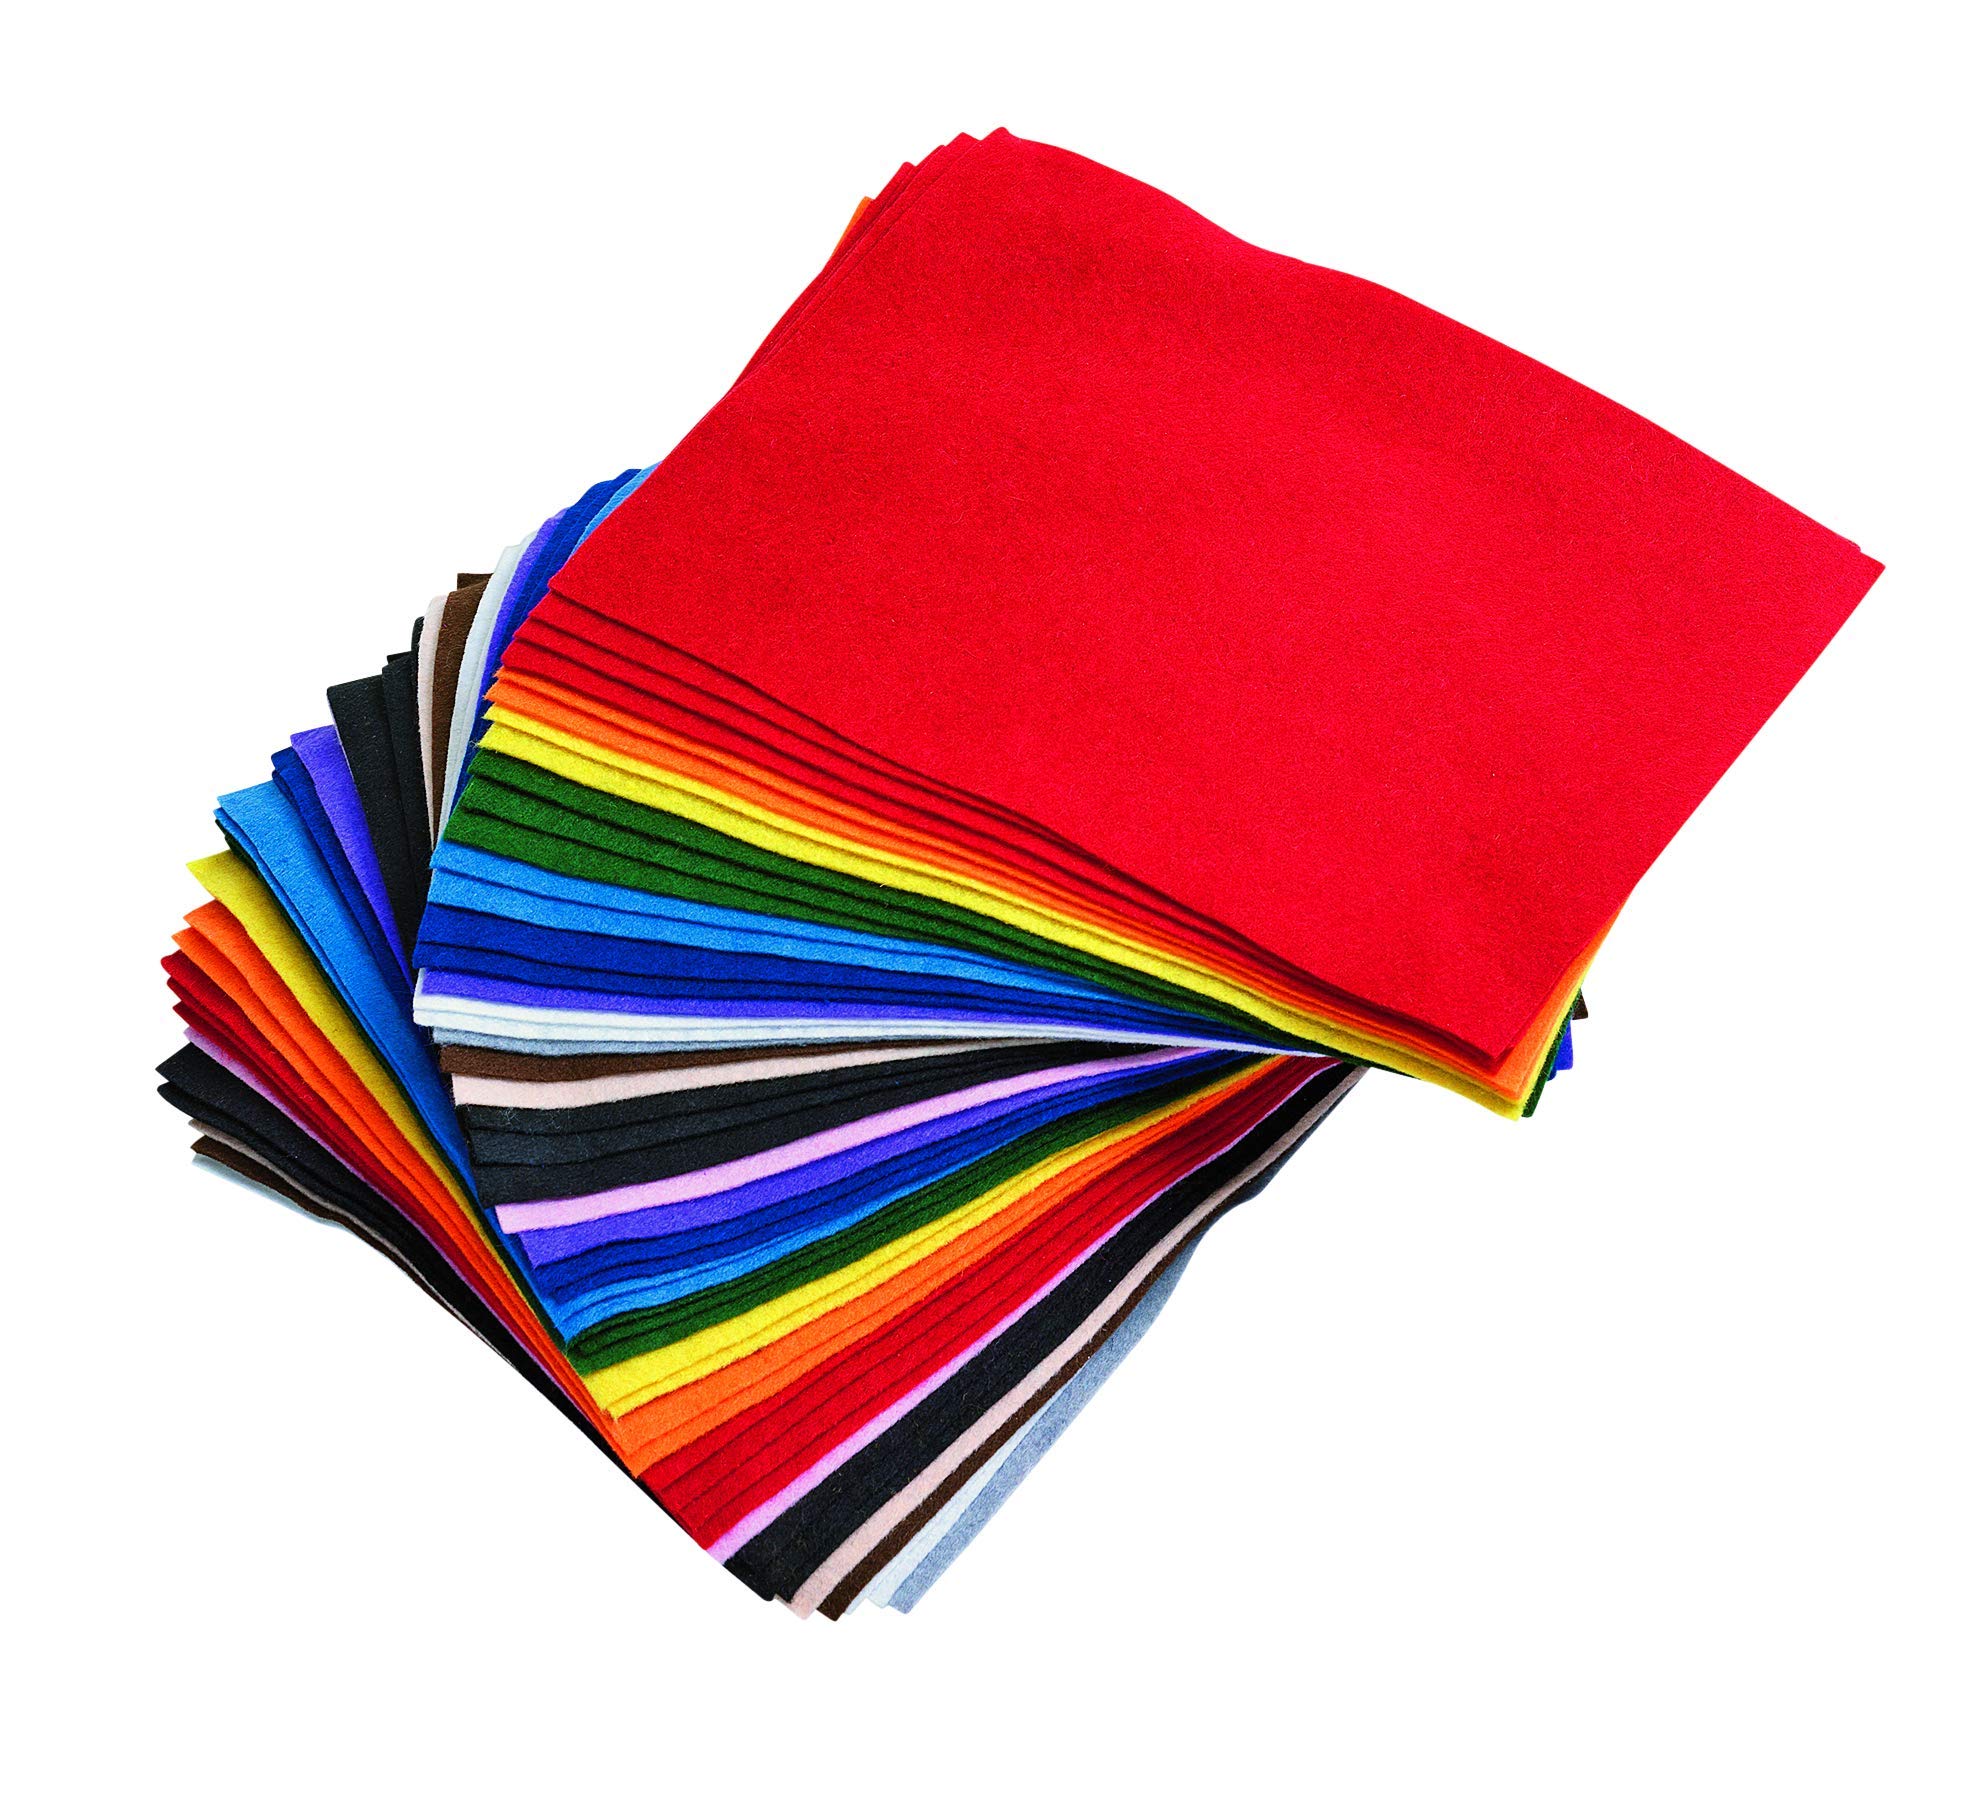 Colorations 100% Polyester Felt Sheets 9 inches x 12 inches, 13 colors, 1mm Thick, 50 Sheet Pack for Sewing and DIY Arts & Crafts Projects